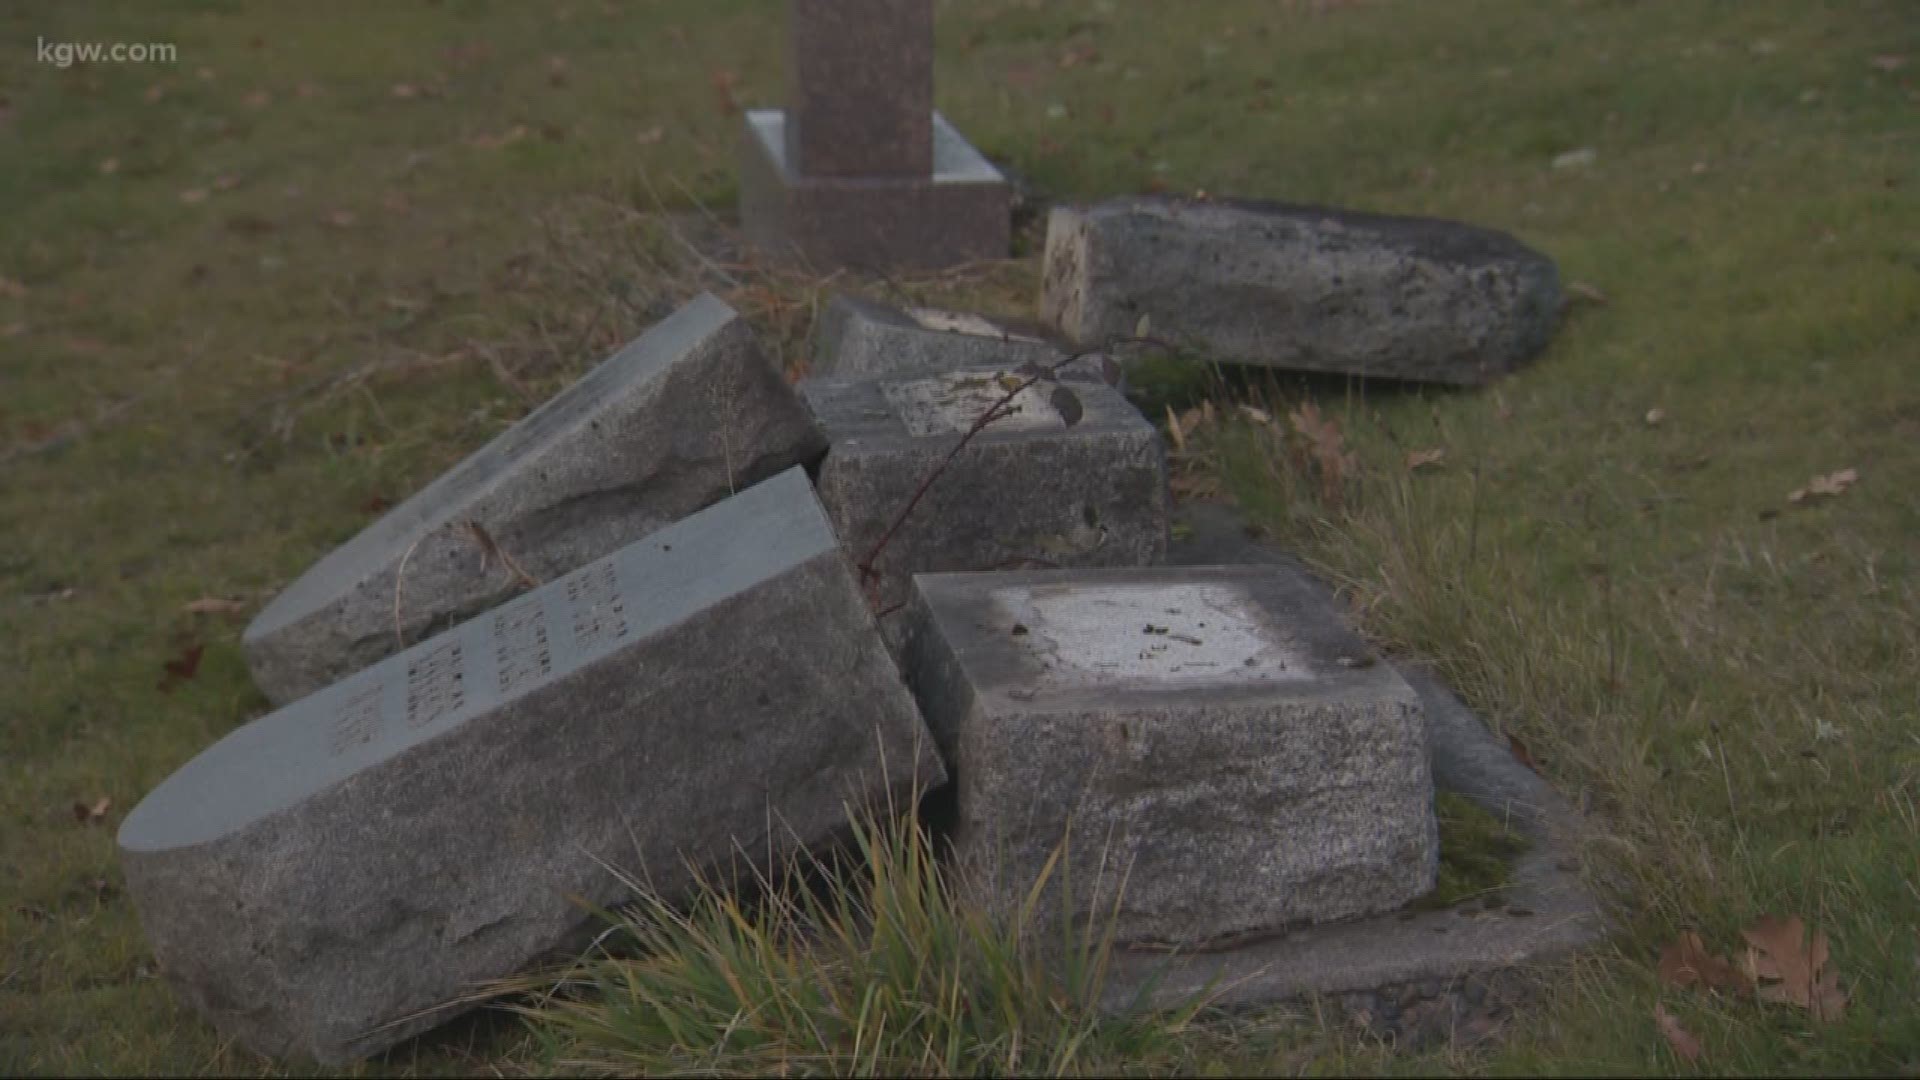 The cemetery's caretaker says the damage from the vandalism is nearly $5,000.